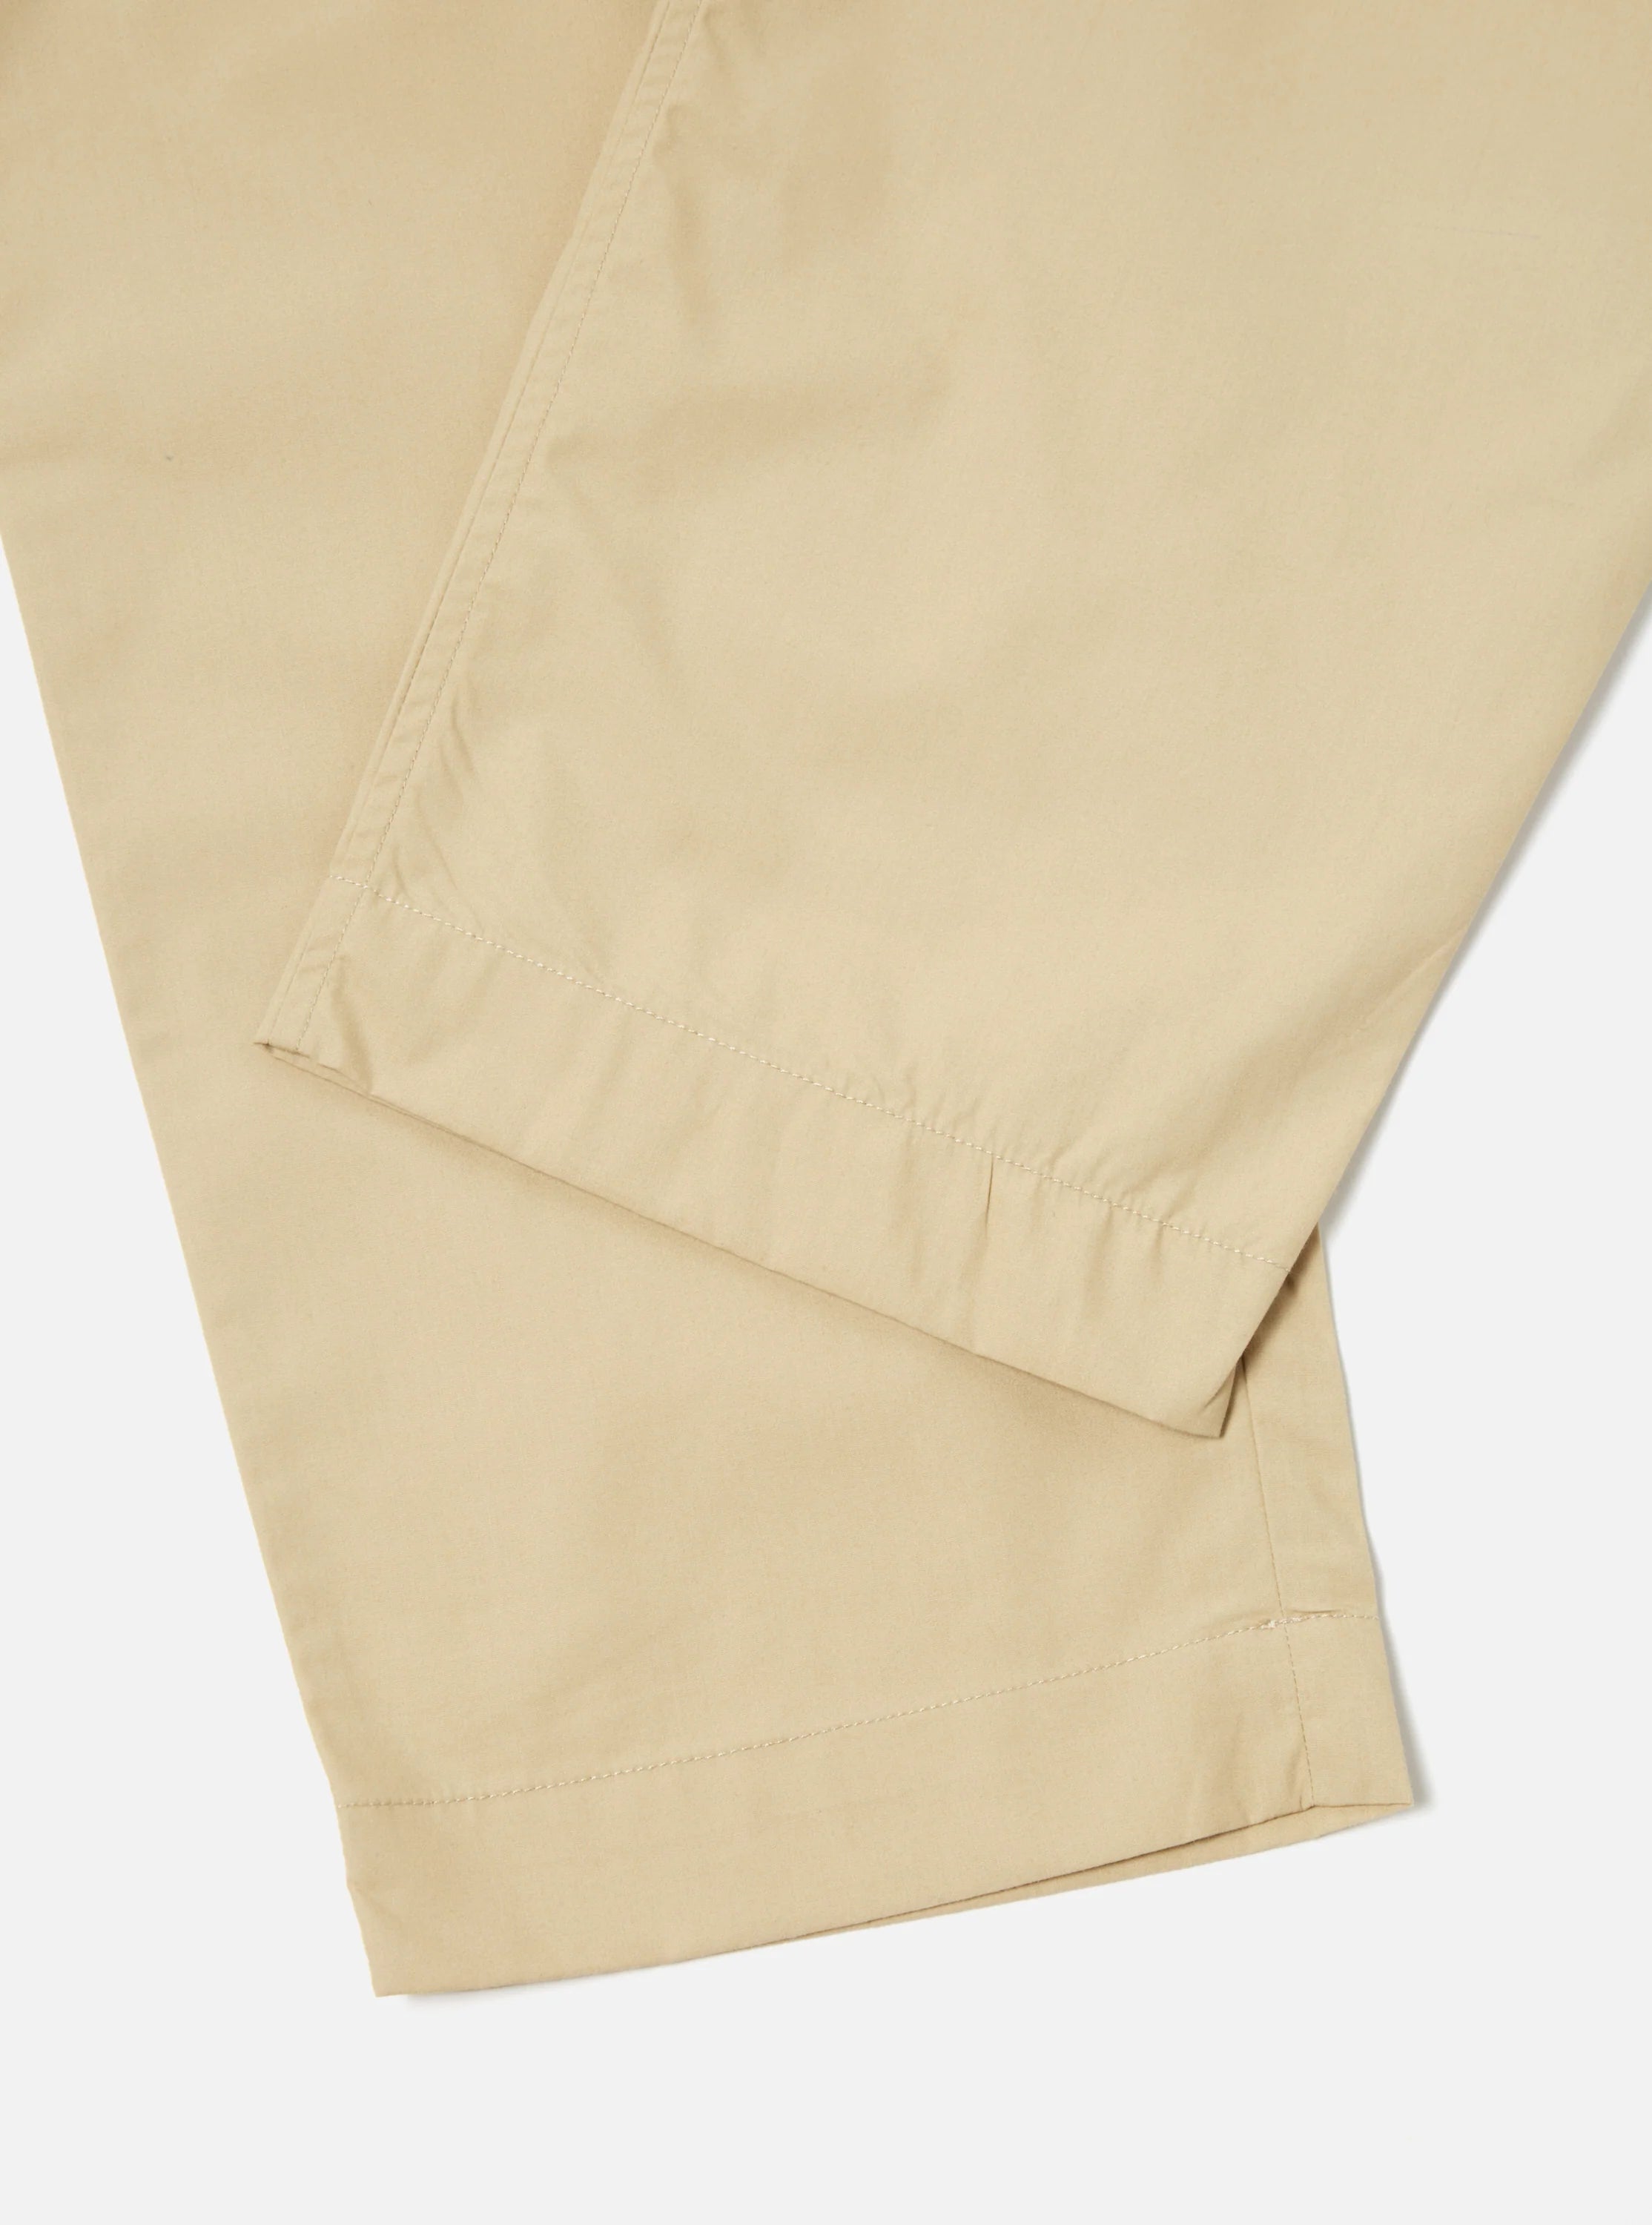 Universal Works Oxford Pant Recycled Poly Tech Men